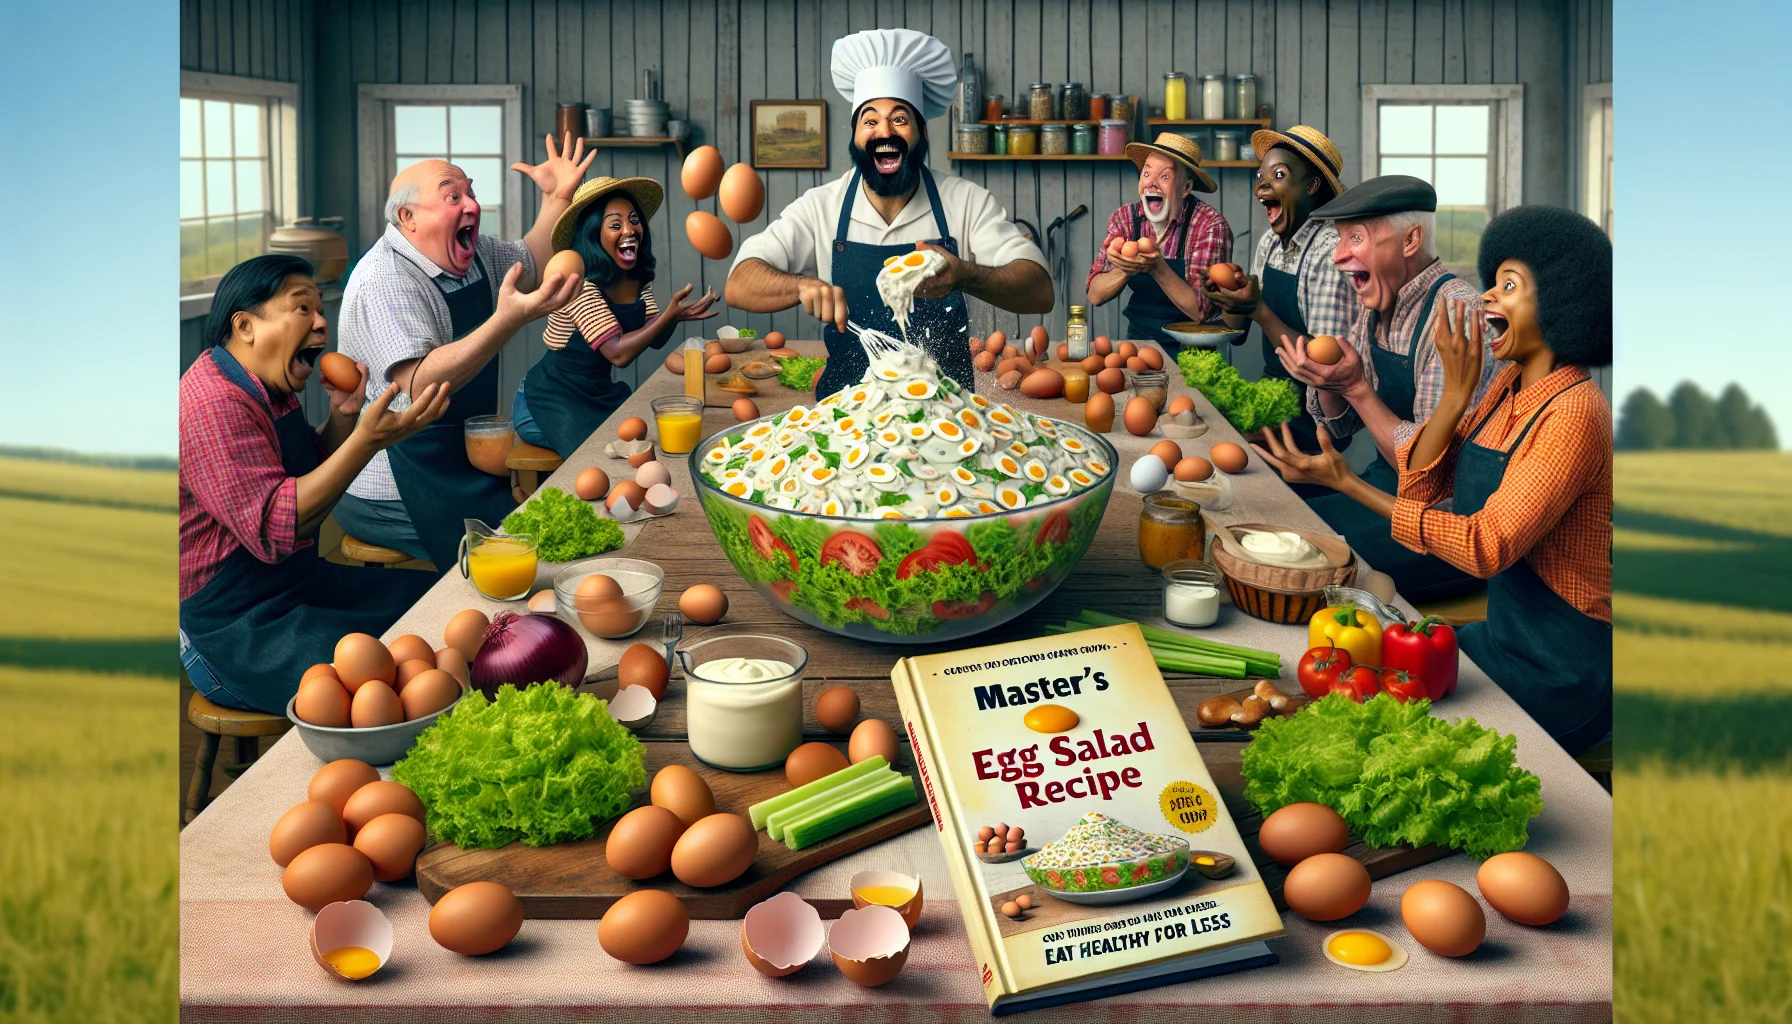 Visualise a hilarious yet appetising scenario featuring an aesthetically pleasing egg salad that follows a master's recipe. Illustrate a gathering of diverse folks around a long wooden table in a country farm-set kitchen. Picture dozens of eggs, vibrant lettuce, creamy mayonnaise, crisp celery, and zesty onions scattered across the table. A book titled 'Master's Egg Salad Recipe: Eat Healthy For Less' lies open among the ingredients, revealing a recipe that's both easy and economical. Amidst this, one can identify a South Asian man with a chef's hat jovially whisking a massive bowl of salad, while a Black woman in farmer's attire hilariously juggles eggs, and a Caucasian man gasps in astonishment — indicating just how fun and cost-effective healthy eating can be.